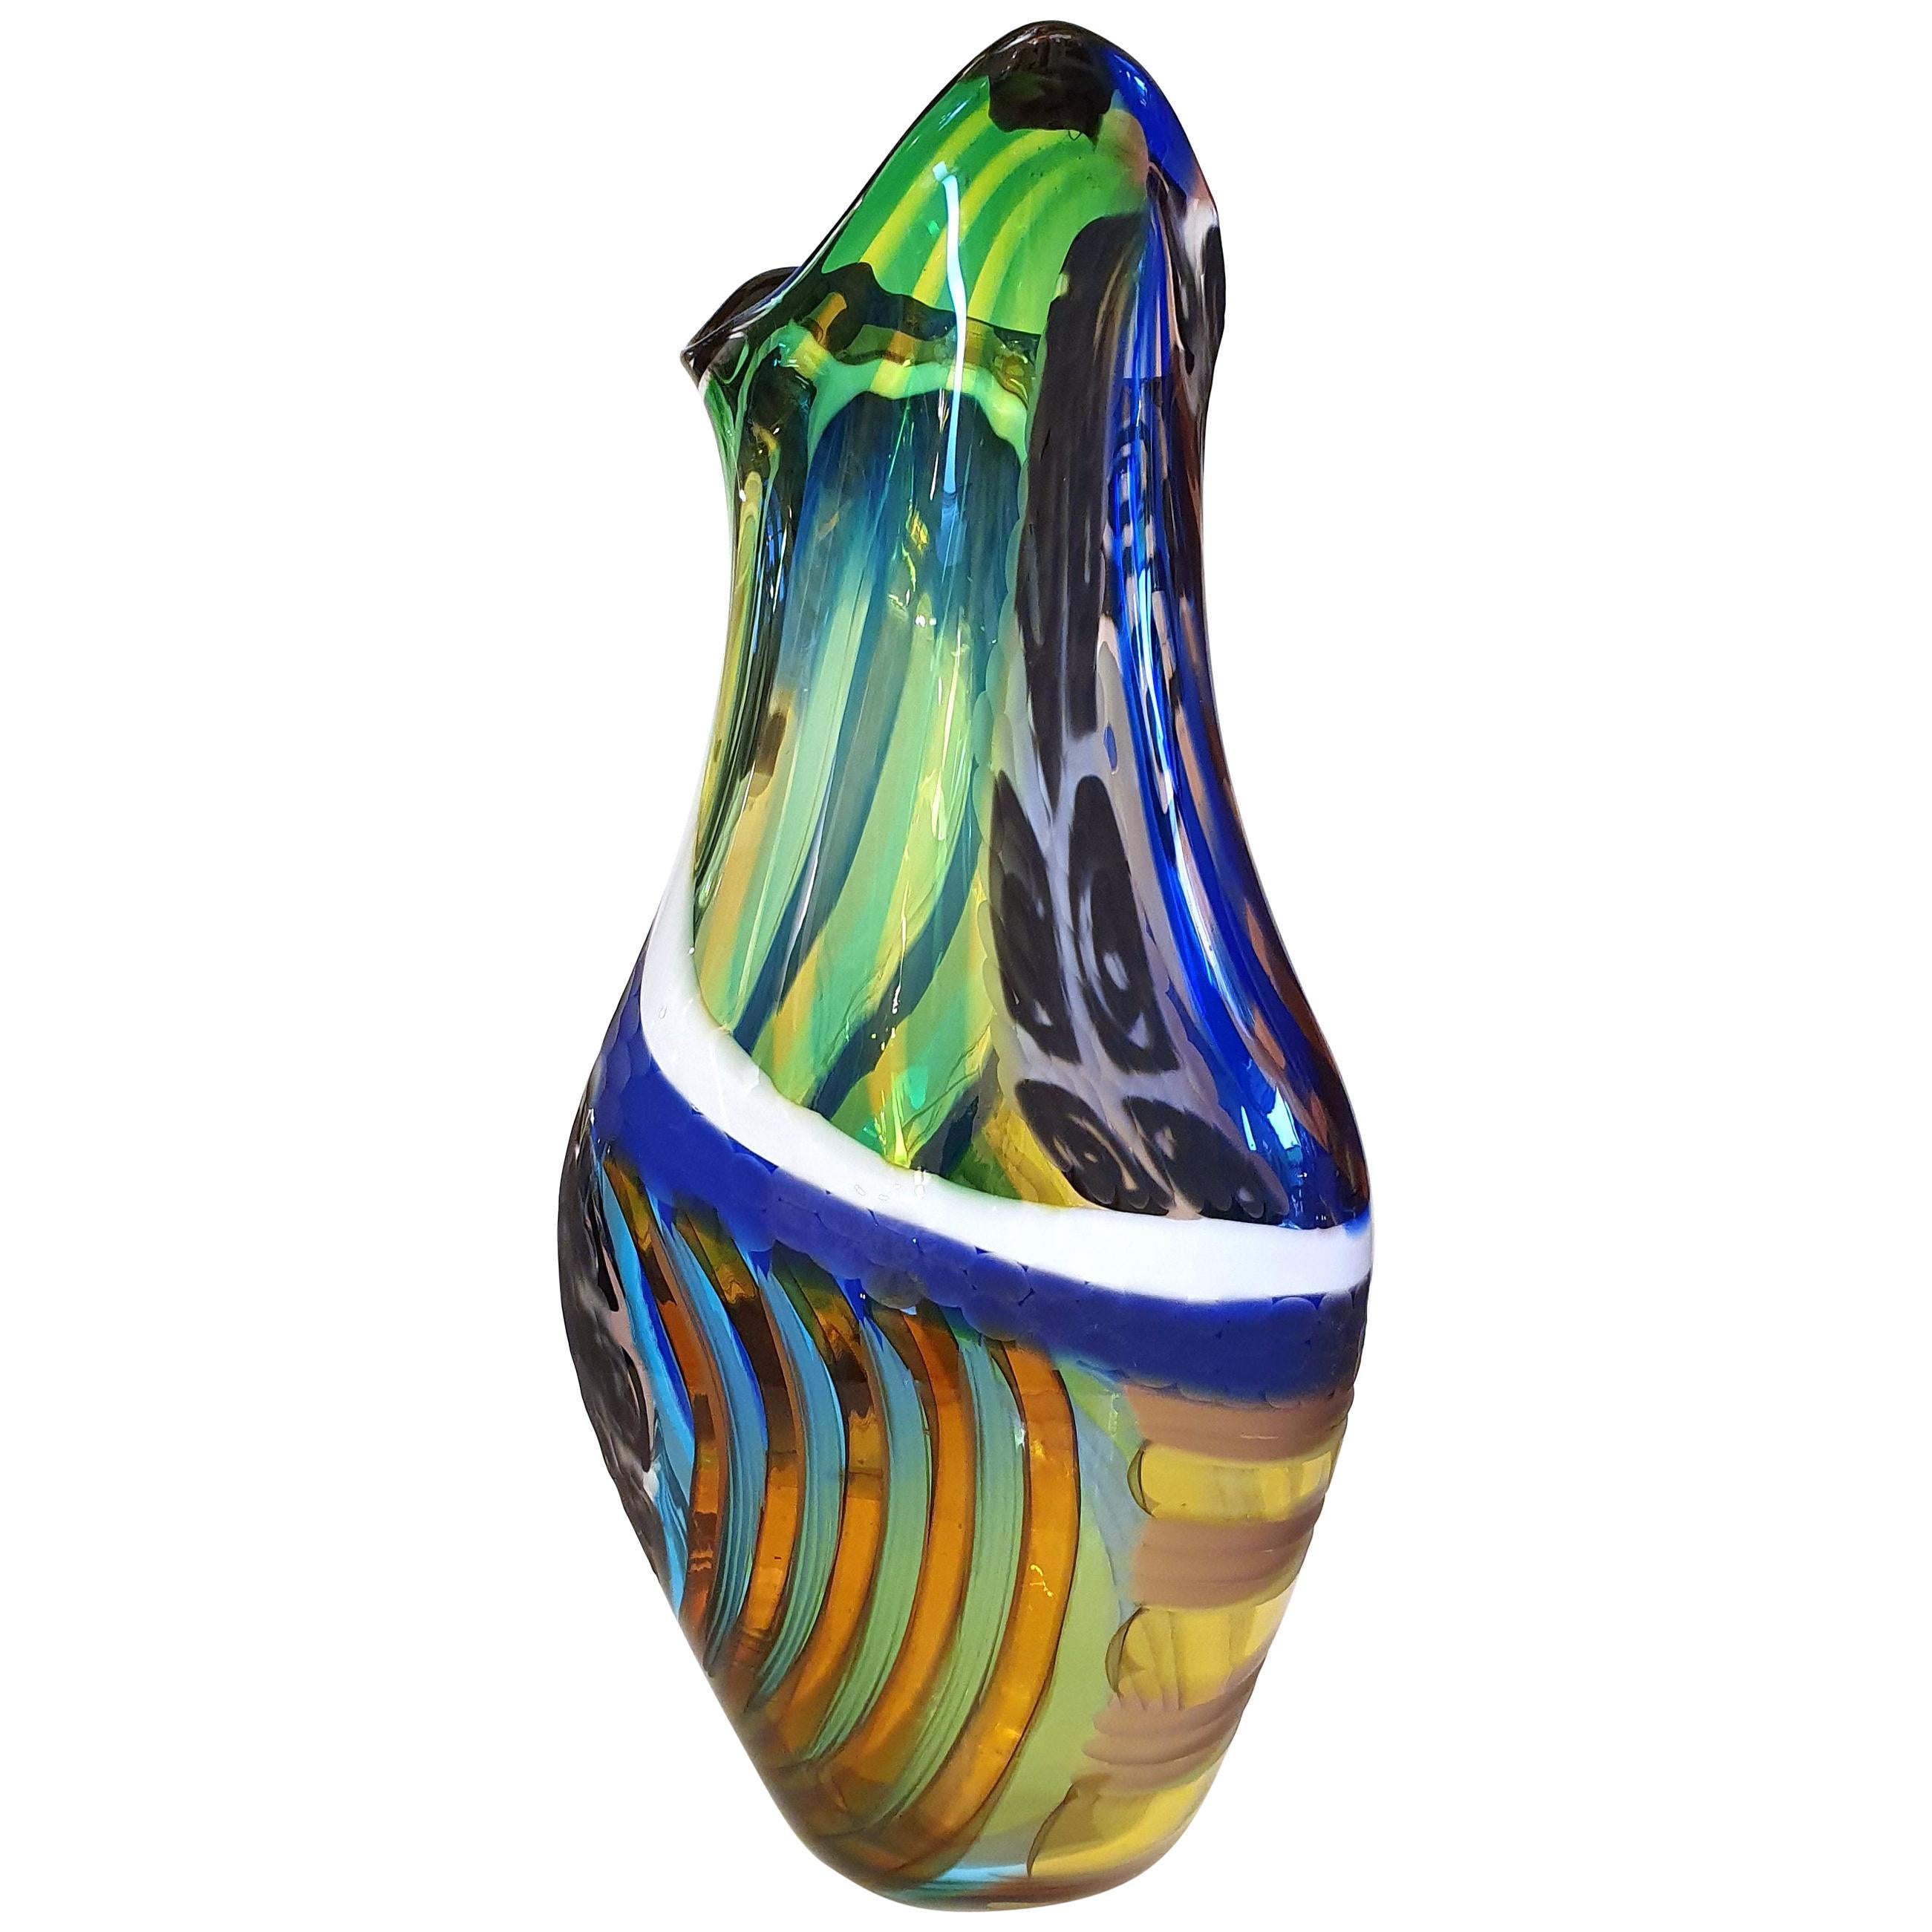 Lino Tagliapietra Murano Glass Vase Signed by the Artist For Sale